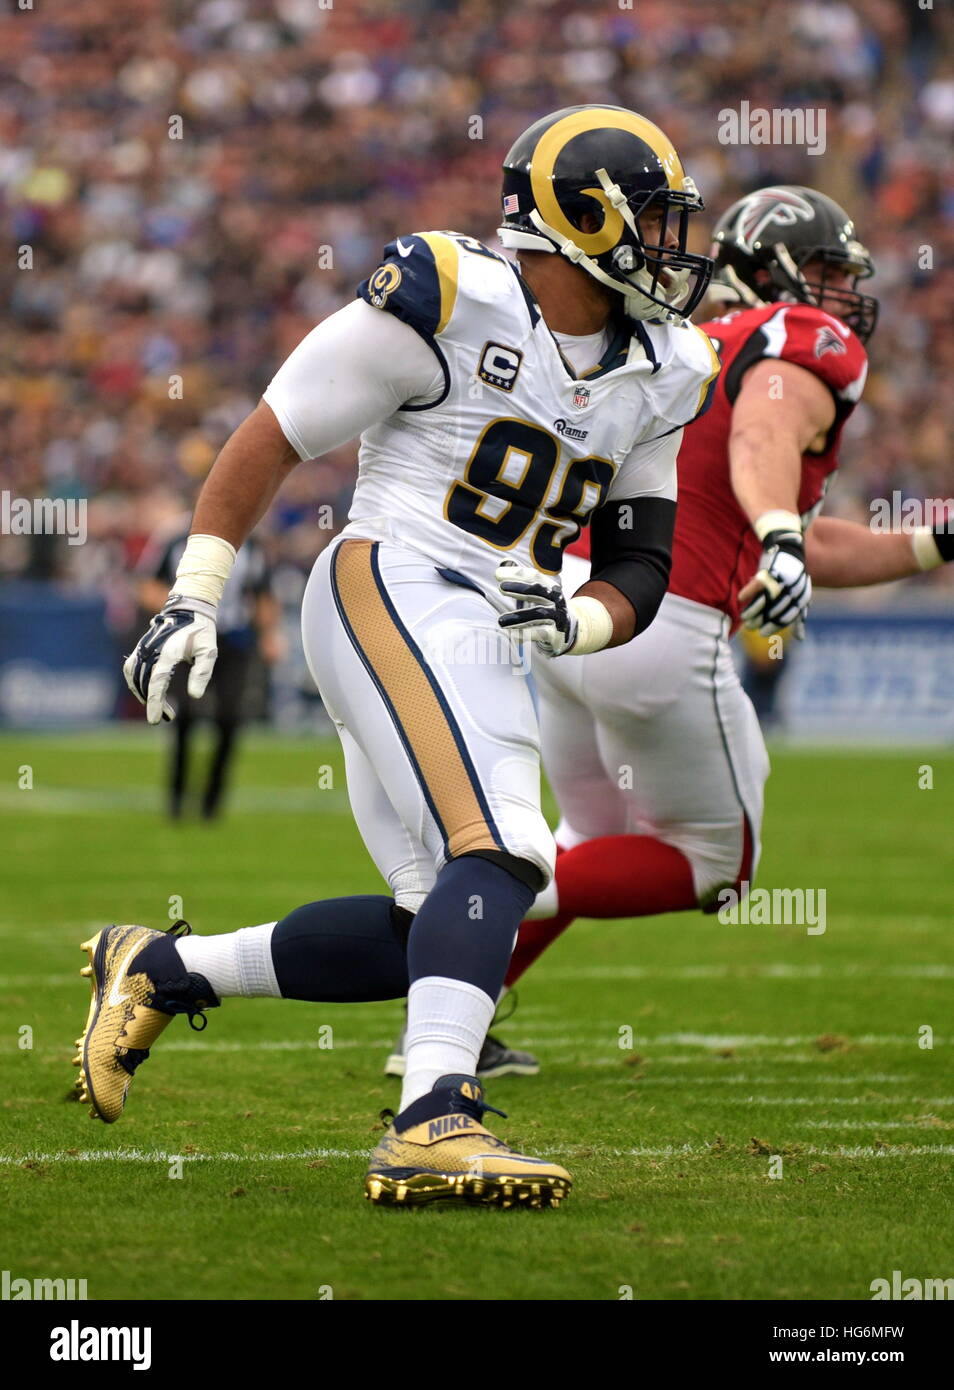 Los Angeles, California, USA. 11th Dec, 2016. Aaron Donald of the Los Angeles Rams in action during a 42-14 loss to the Atlanta Falcons at the Los Angeles Memorial Coliseum in Los Angeles, Ca. © John Pyle/ZUMA Wire/Alamy Live News Stock Photo